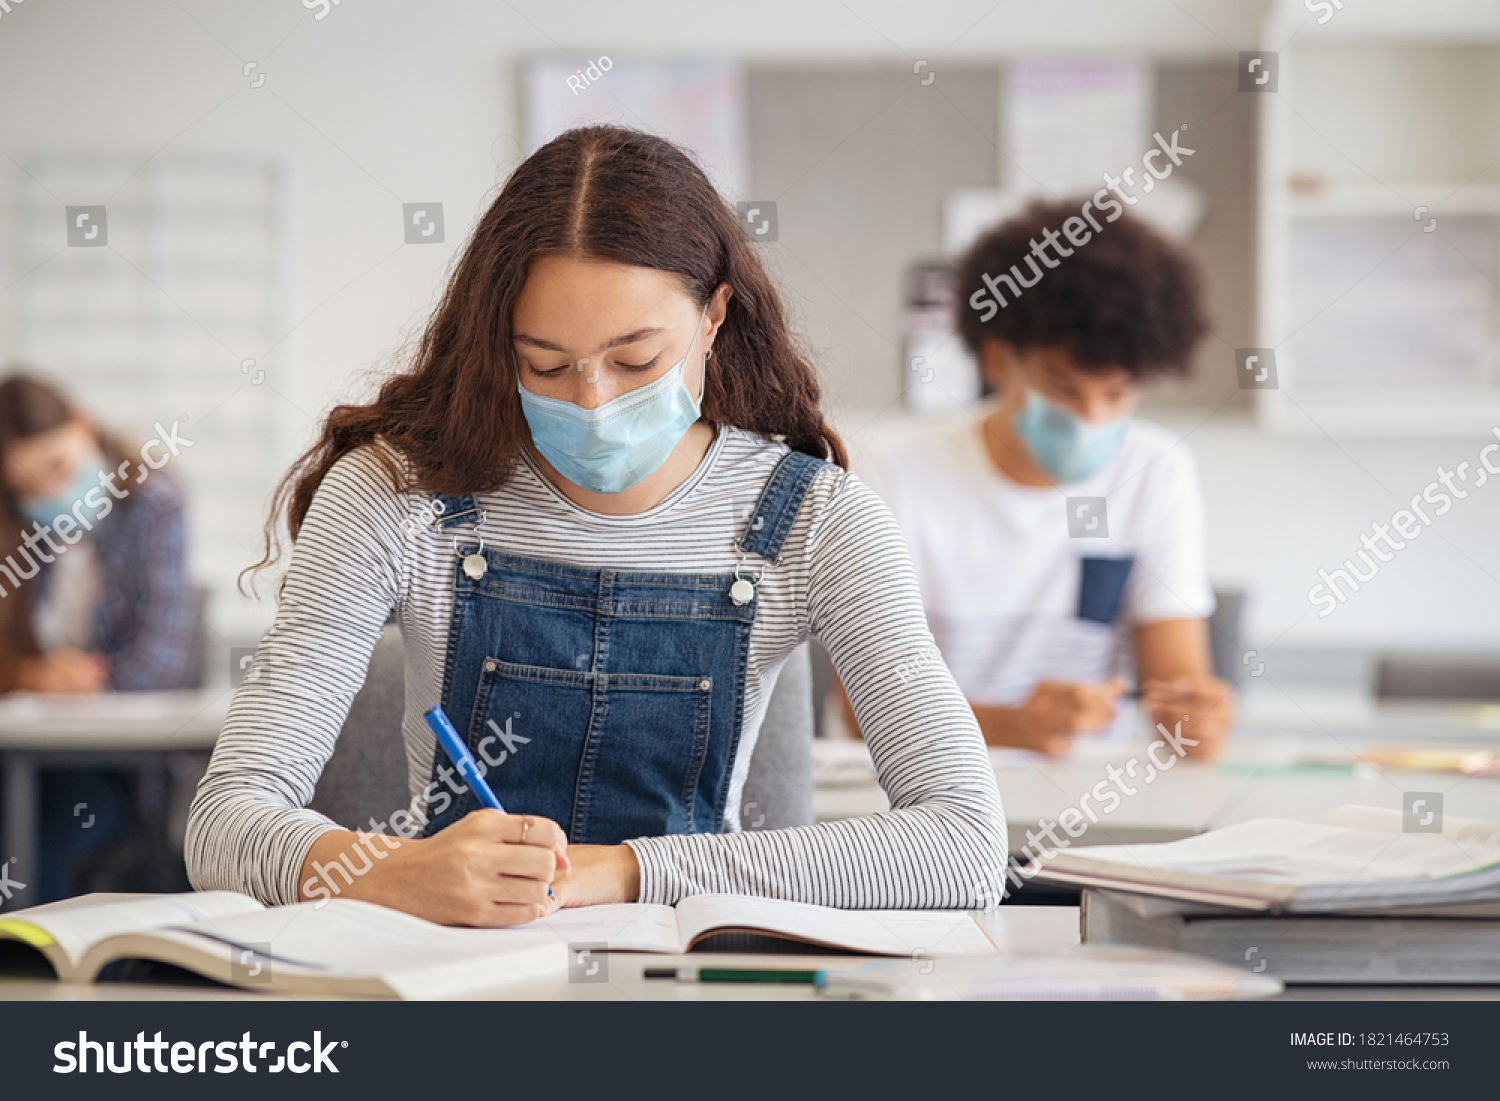 High school student taking notes while wearing face mask due to coronavirus emergency. Young woman sitting in class with their classmates and wearing surgical mask due to Covid-19 pandemic. #1821464753